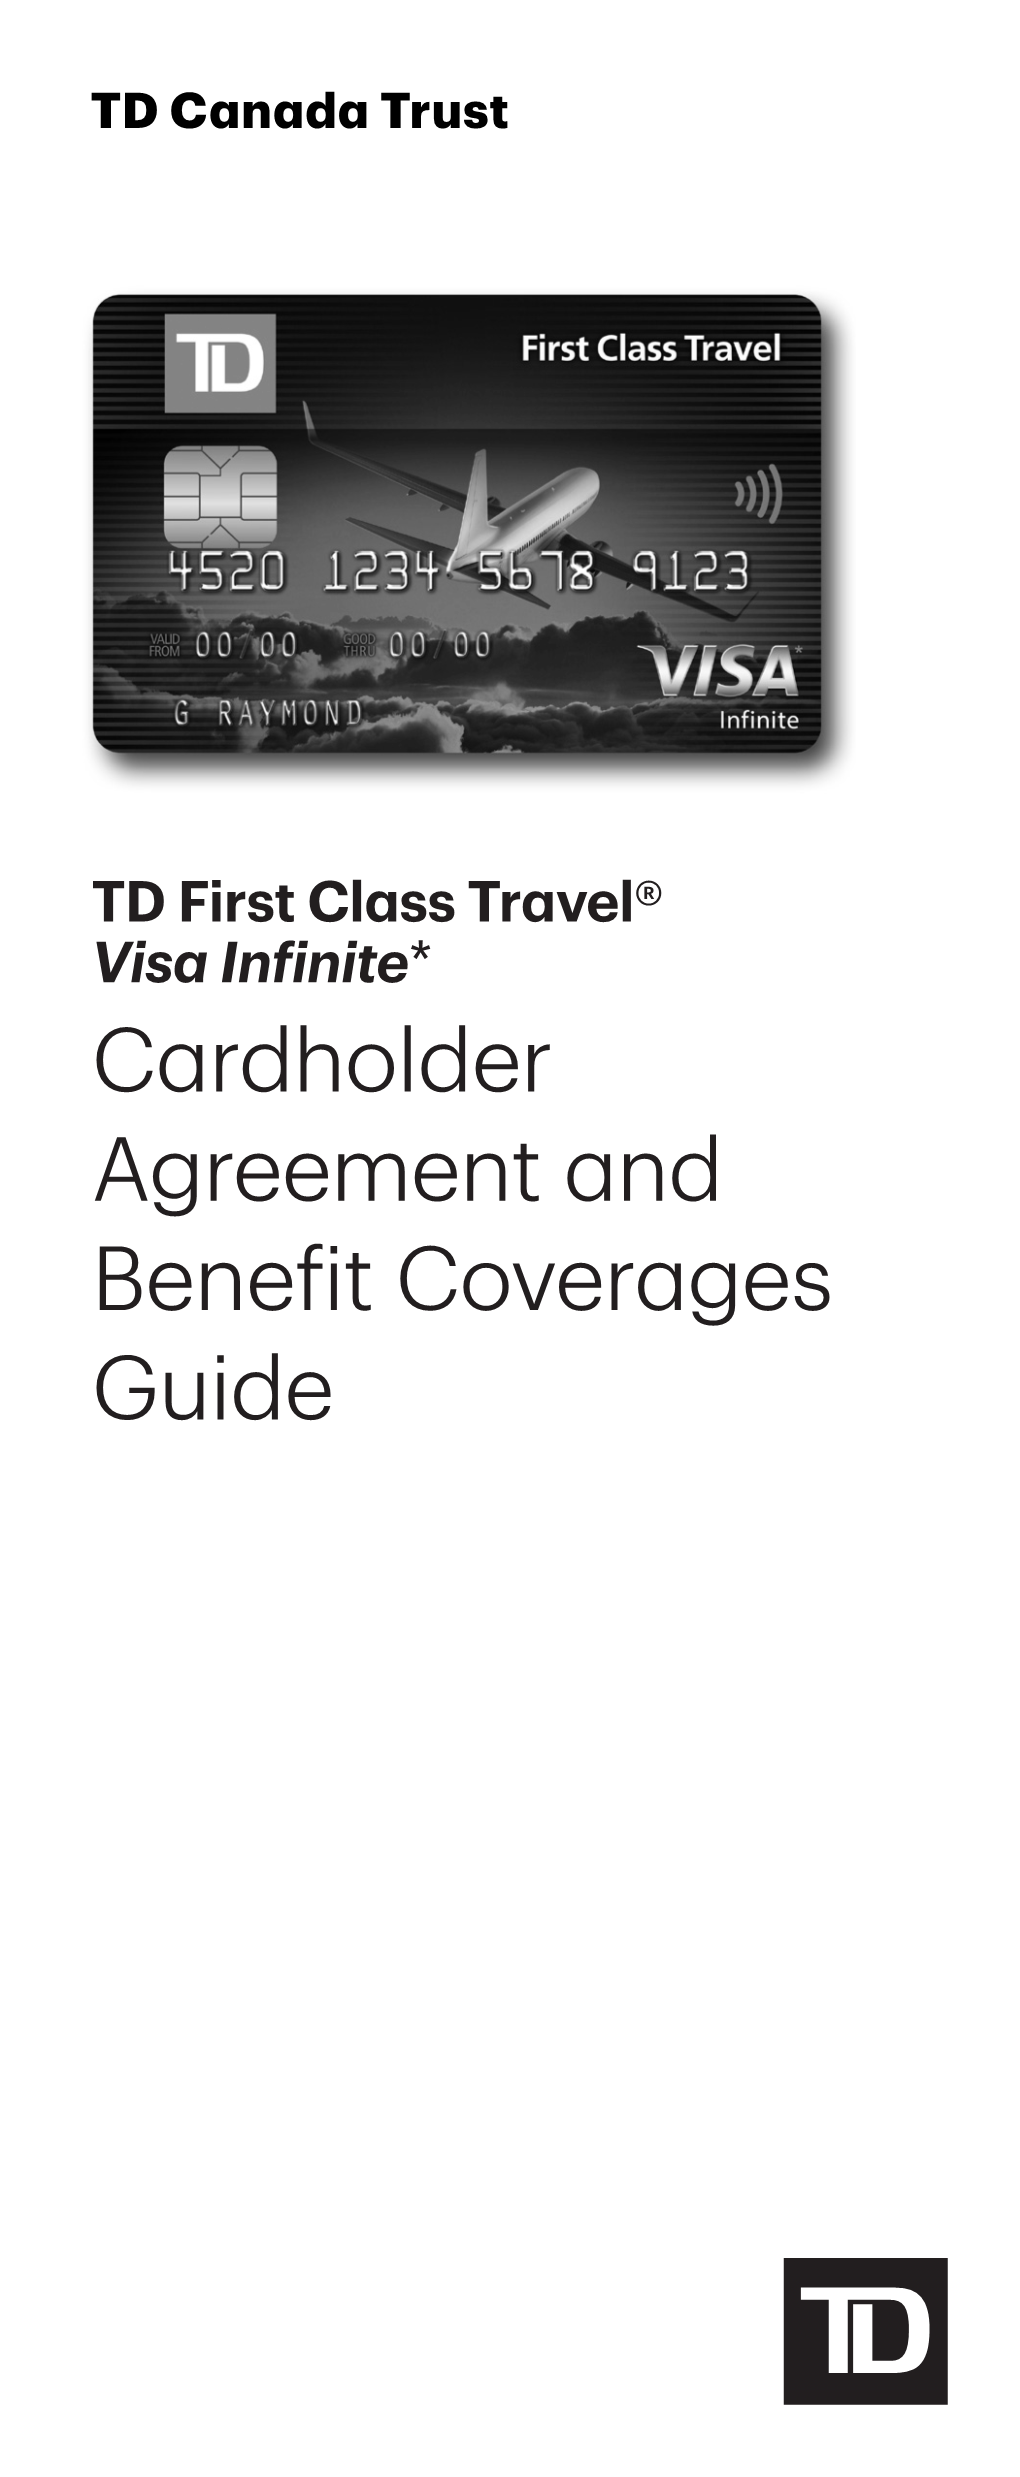 TD First Class Travel Visa Infinite Cardholder Agreement and Benefit Coverages Guide